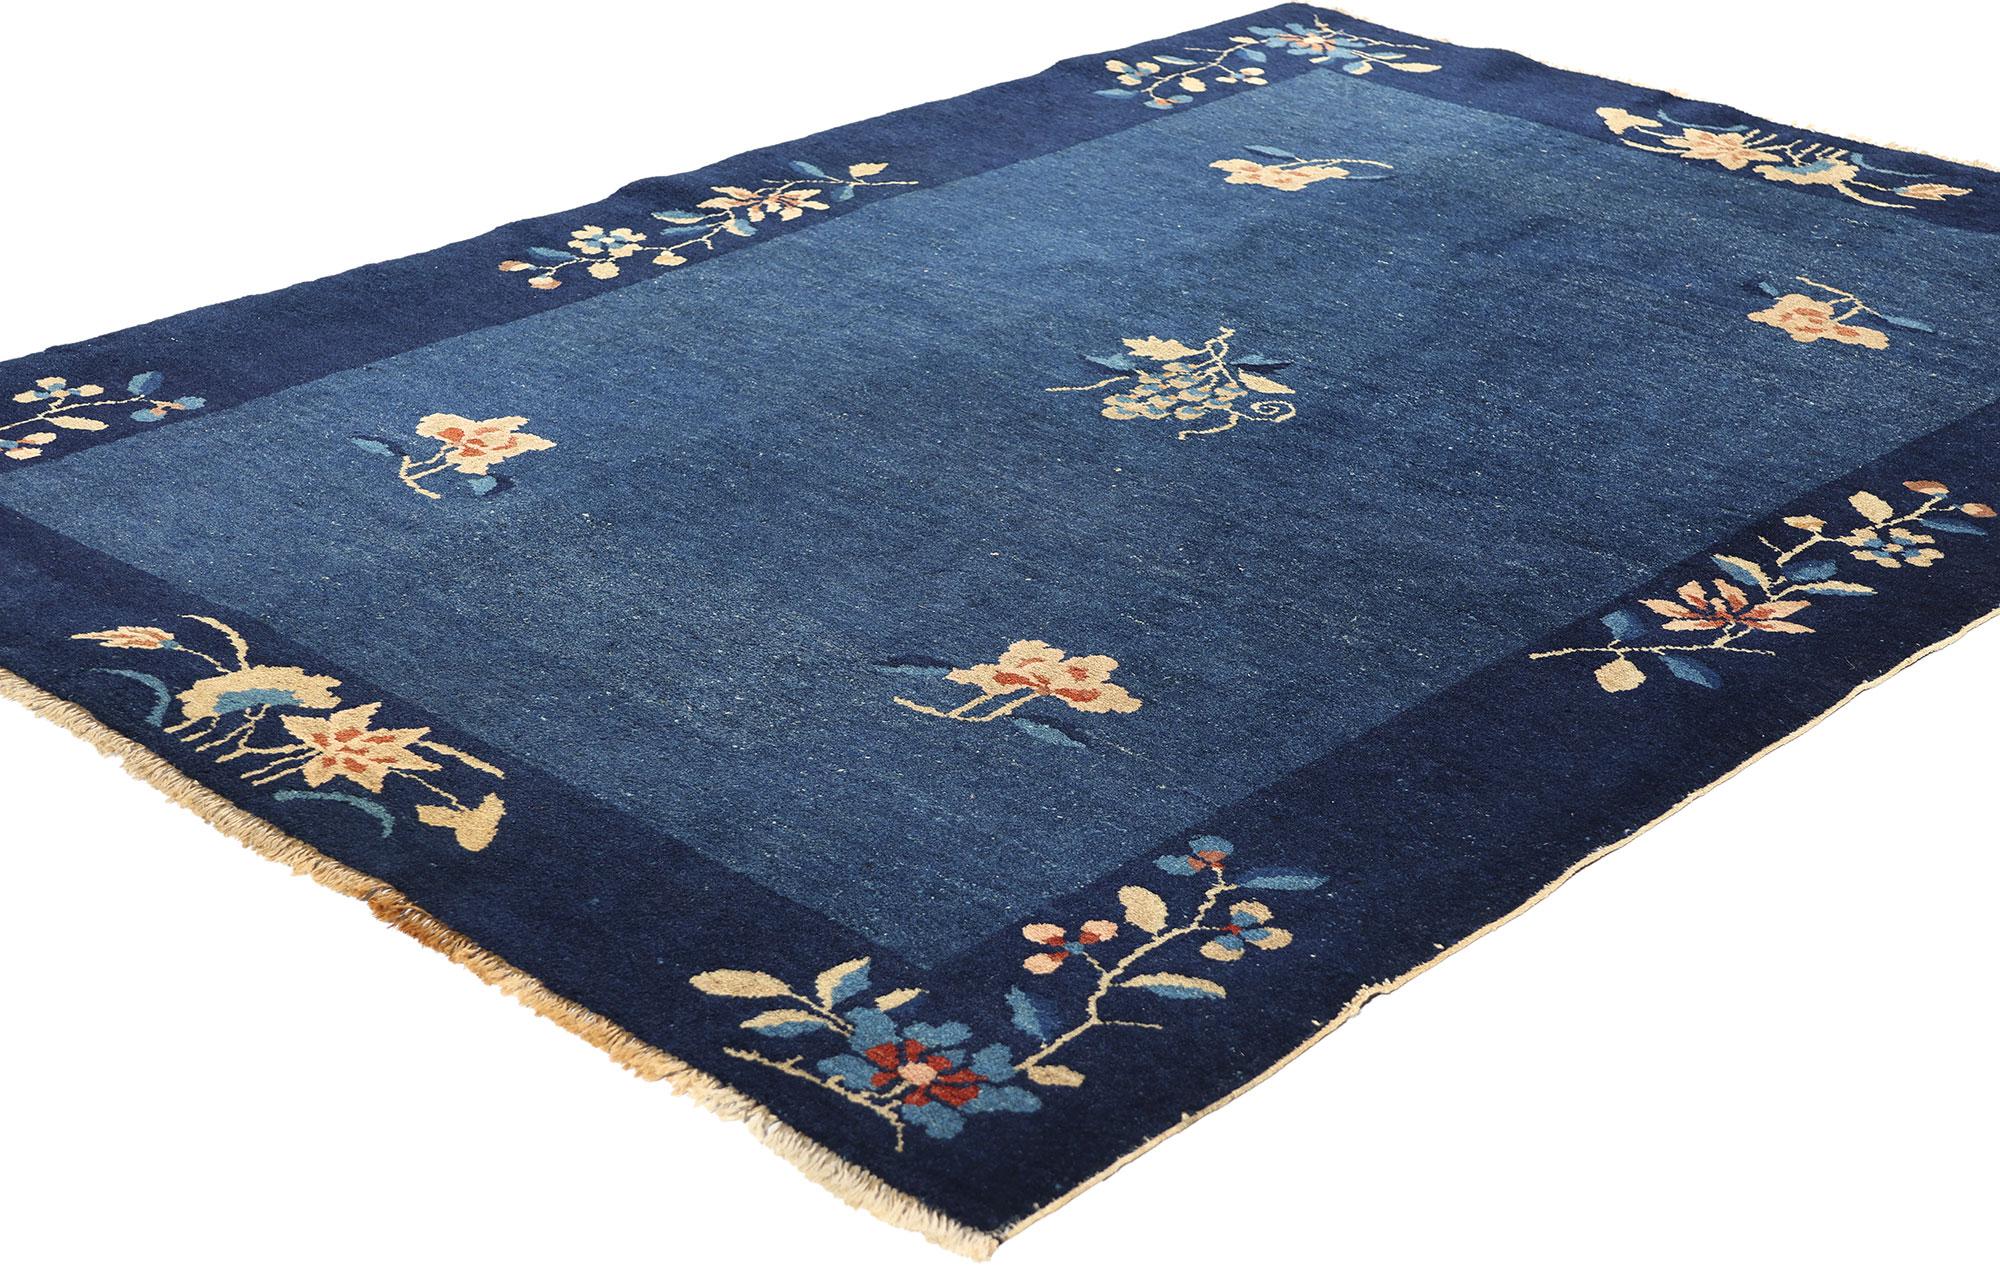 78762 Antique Blue Chinese Peking Rug, 04'00 x 05'09. Chinese Peking rugs, originating from Beijing (formerly known as Peking), China, are renowned for their intricate designs, vibrant colors, and thick wool pile. Crafted using traditional weaving